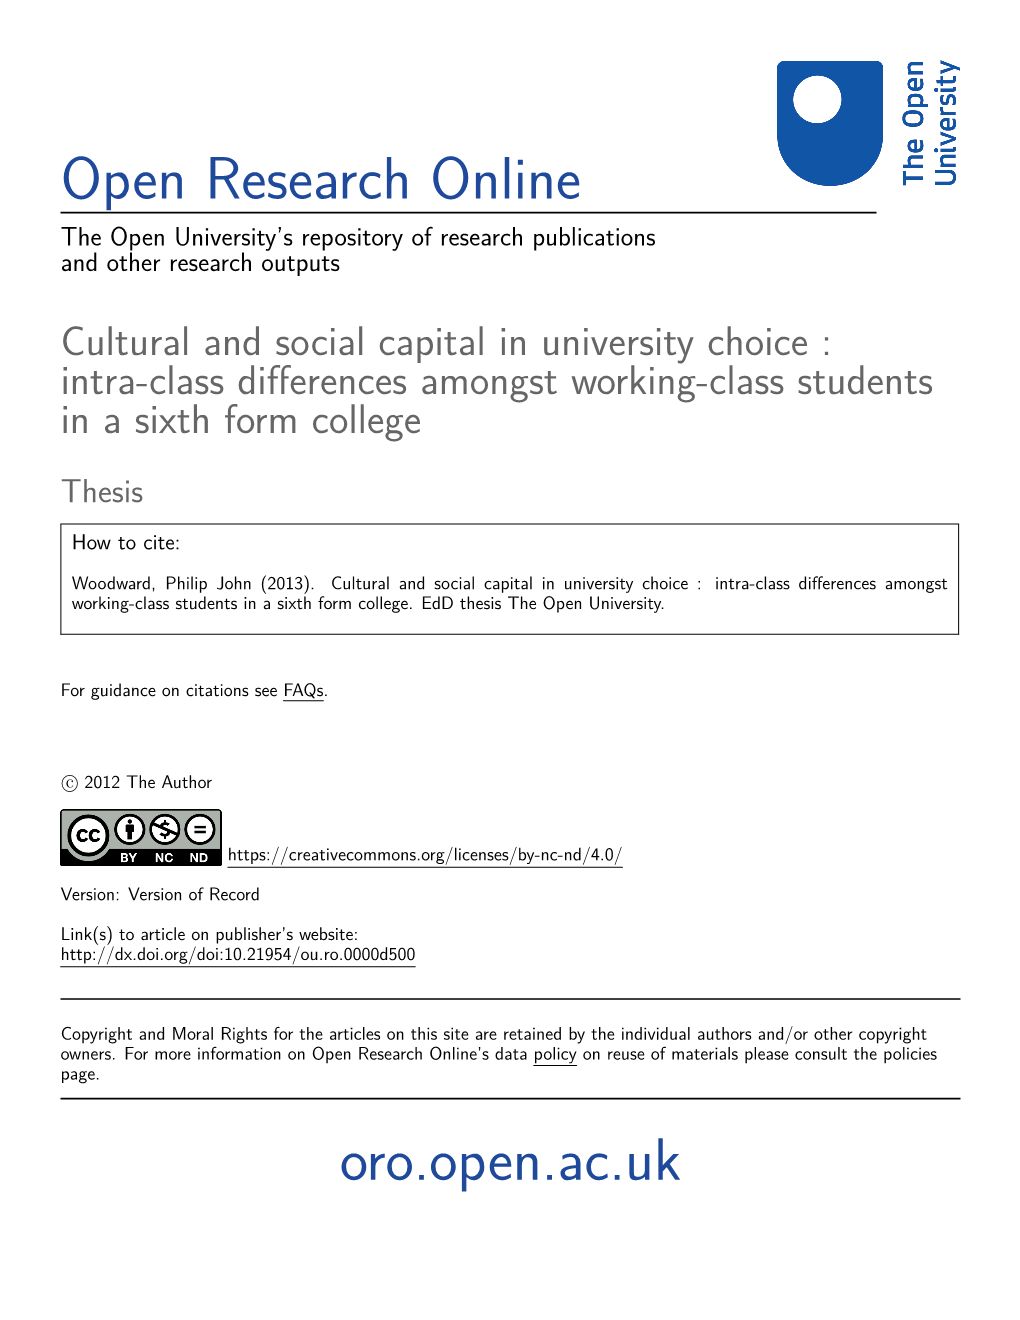 Cultural and Social Capital in University Choice : Intra-Class Differences Amongst Working-Class Students in a Sixth Form College